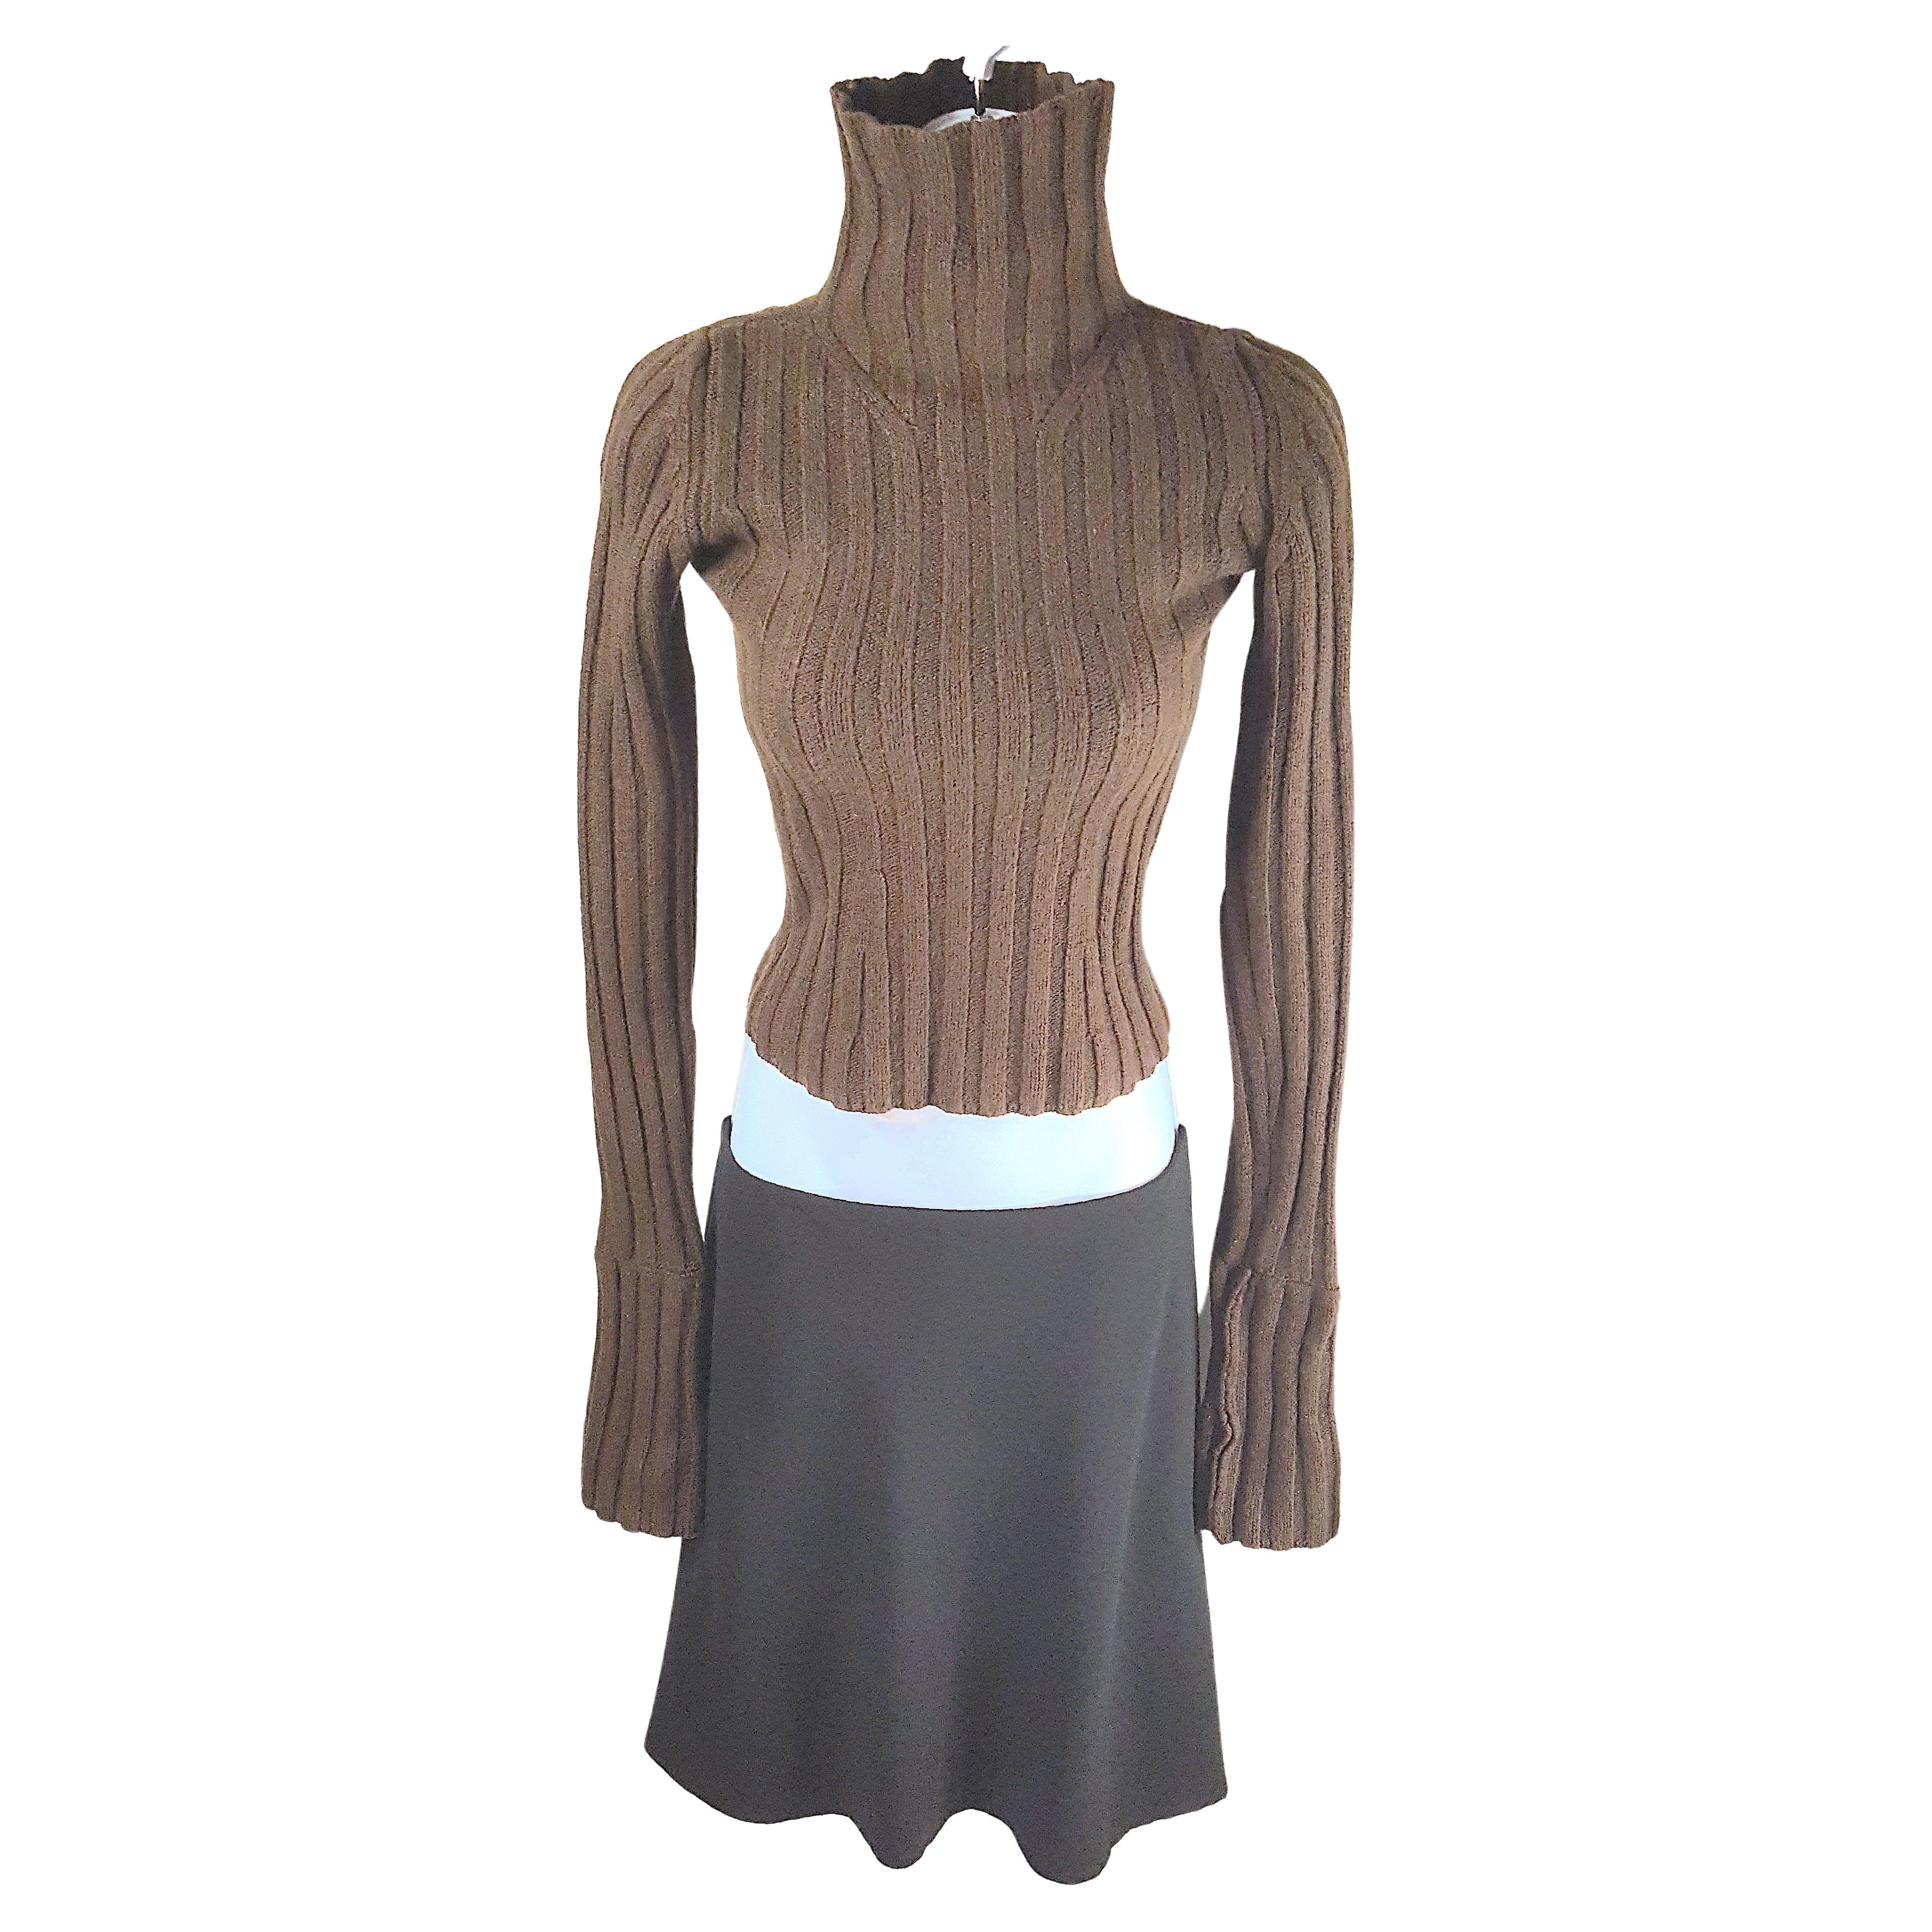 Like a turtleneck ensemble acquired by TheMet Costume Institute, Ann Demeulemeester designed this bold-silhouette contrasting-texture wool set of chocolate ribbed high-neck cropped tight knit sweater and black bias-cut crepe mini skirt for her